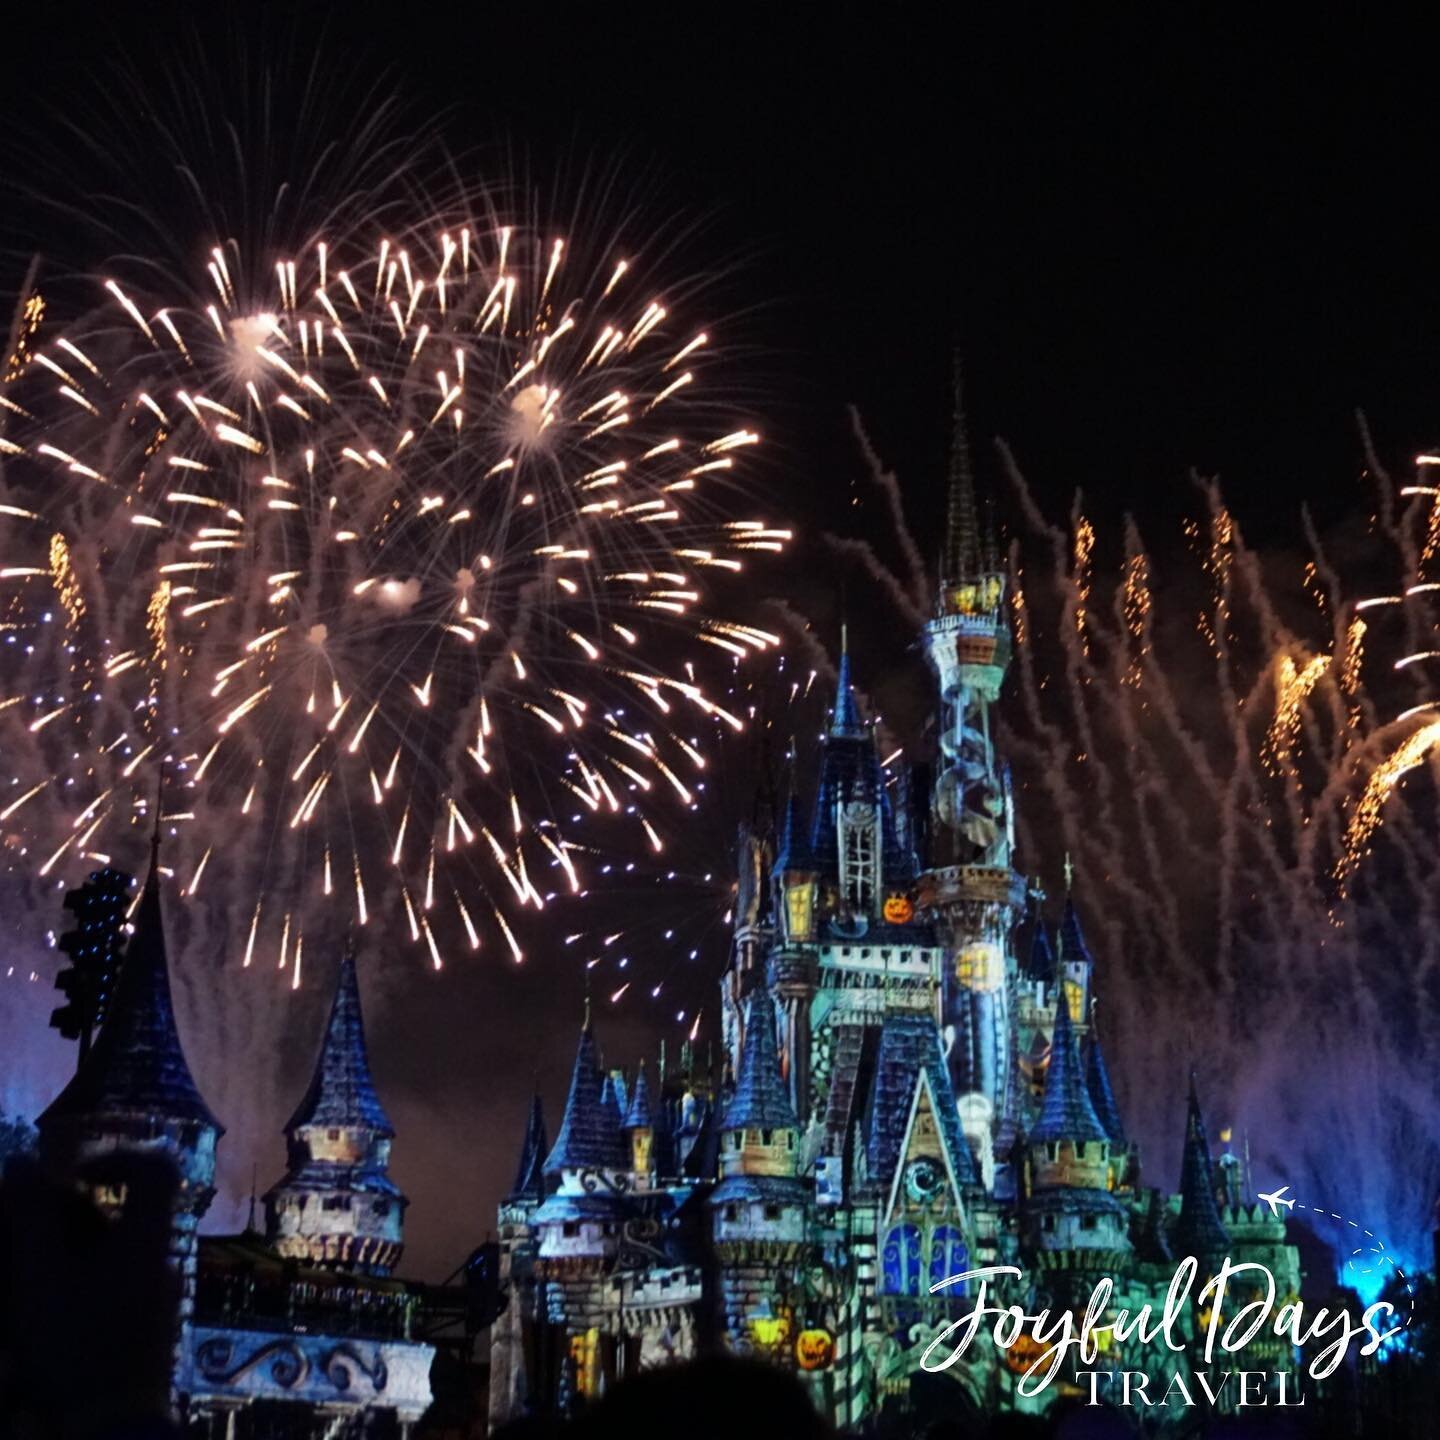 Happy Halloween! Here&rsquo;s a throwback to last month where we were able to enjoy the wonderful fireworks show at Mickey&rsquo;s Not So Scary Halloween Party! 
Are you dressing up today? We would love to see or hear about your costume!